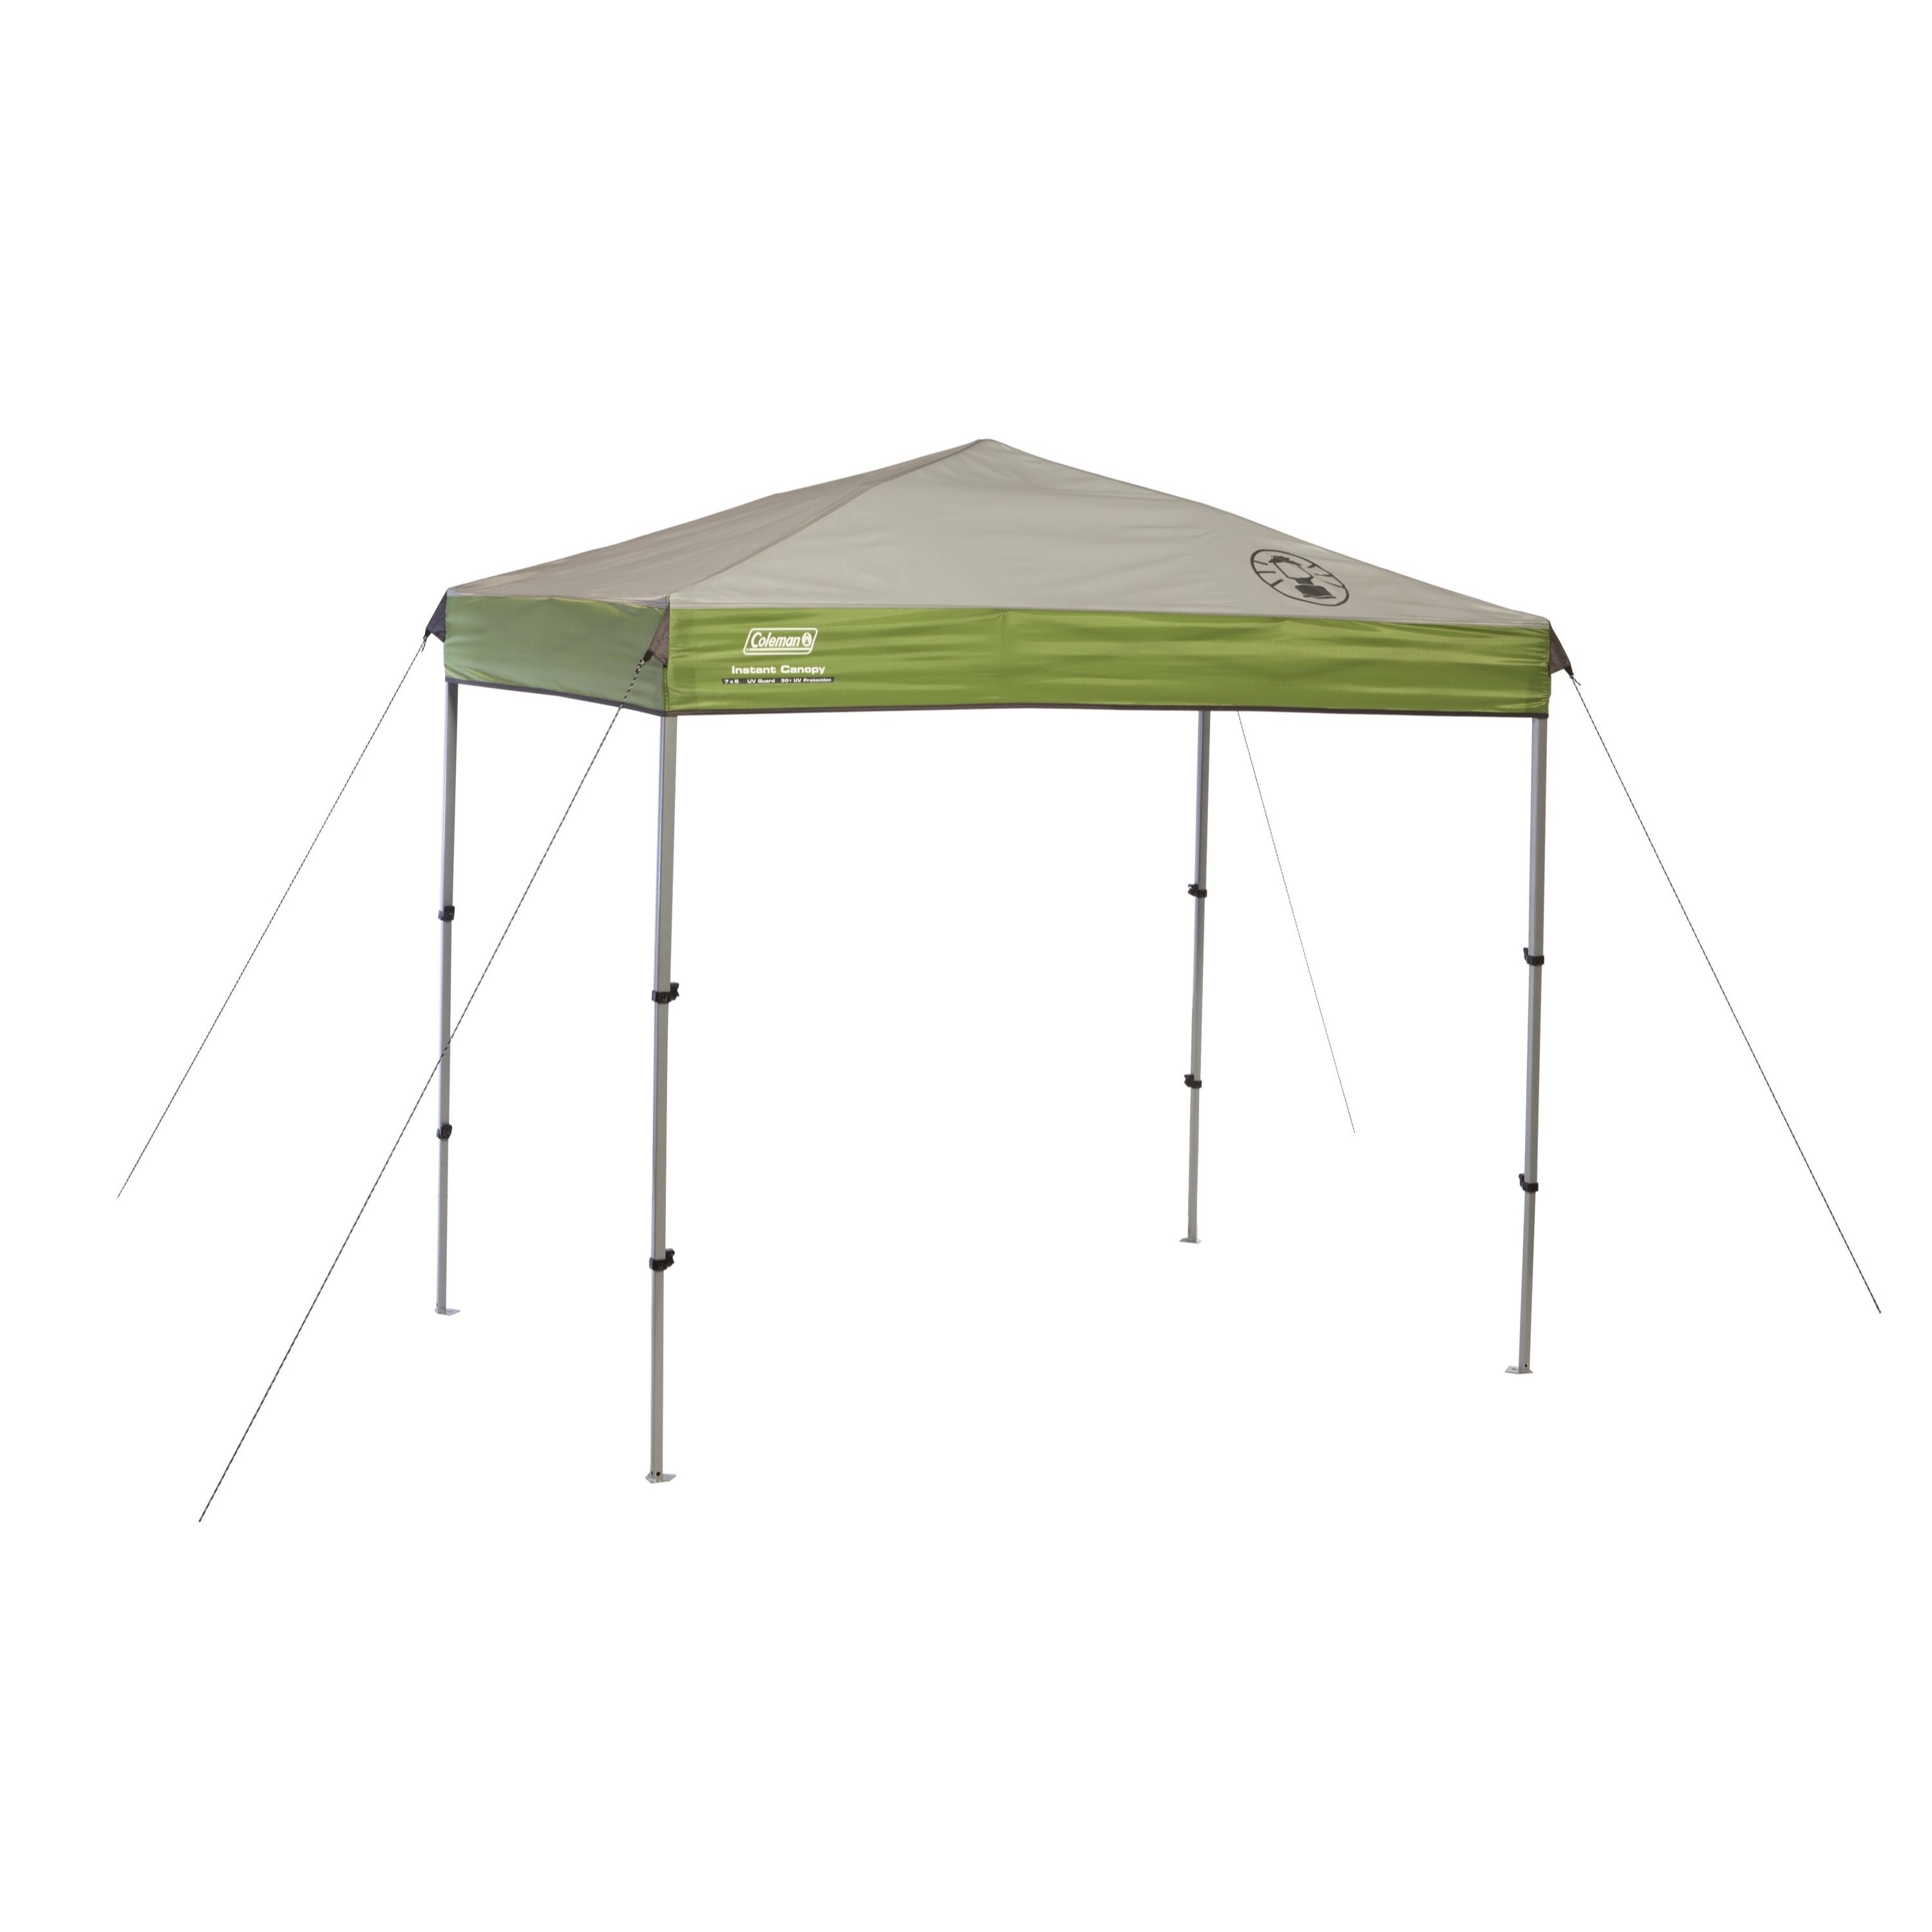 Coleman 7' x 5' Canopy Sun Shelter Tent with Instant Setup, Green - image 1 of 10